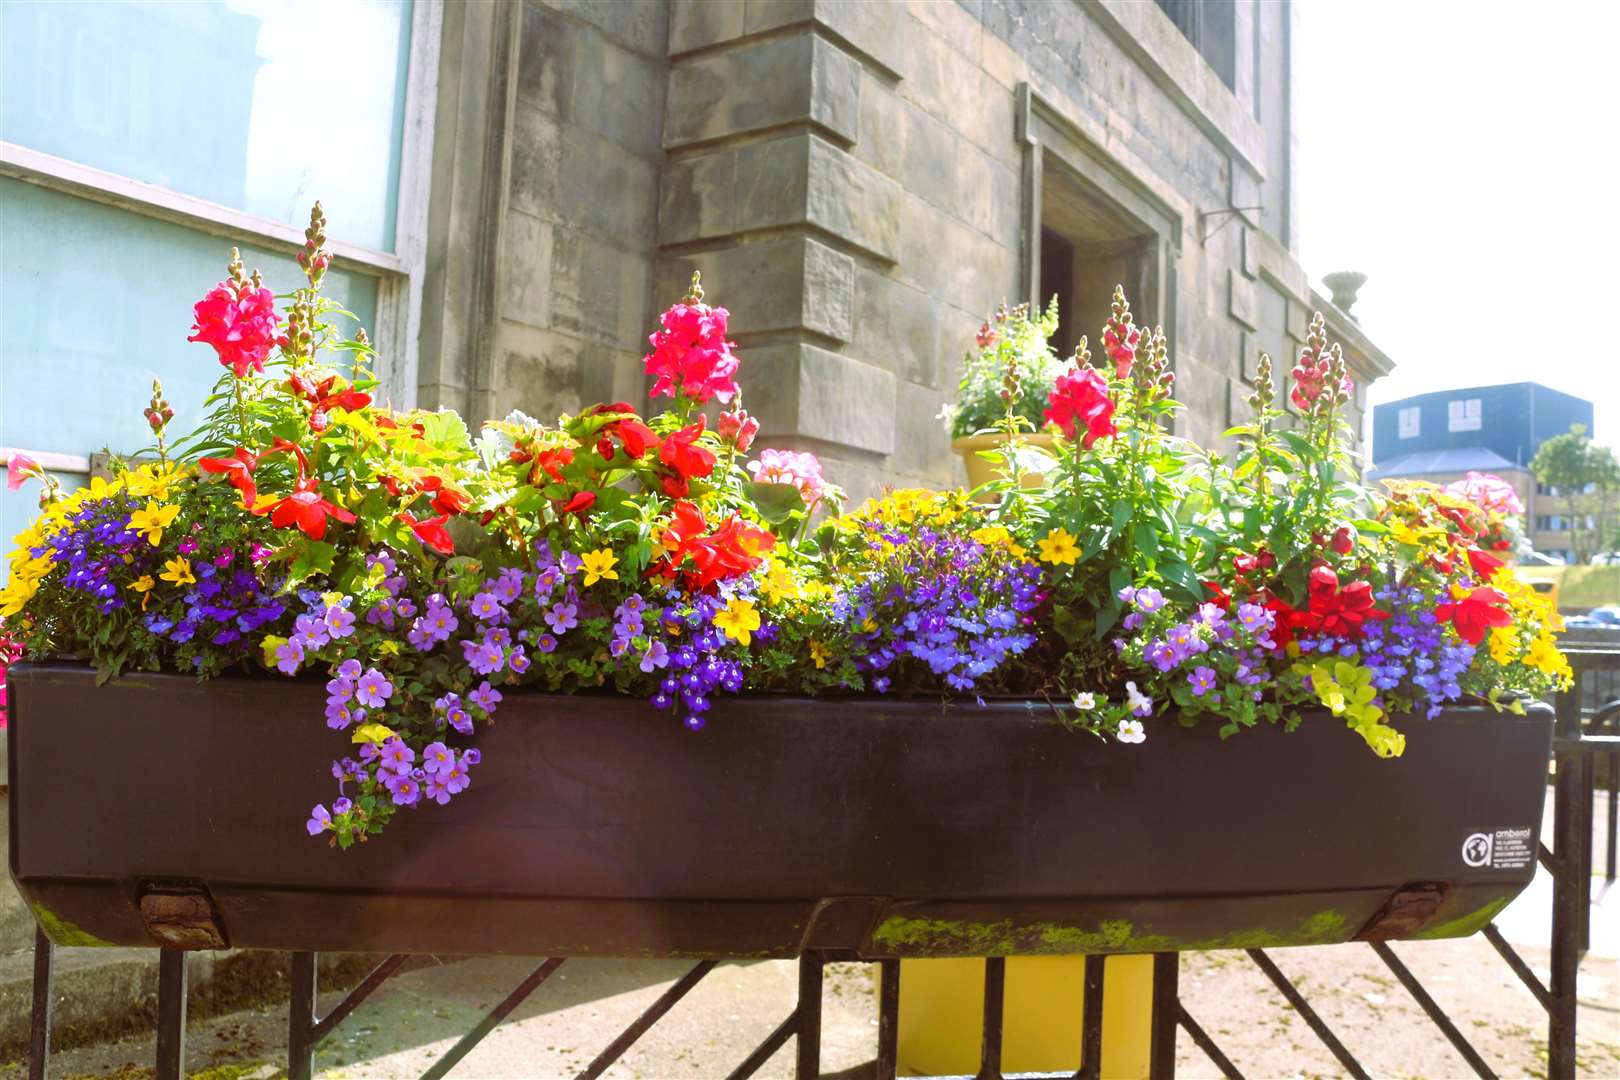 Wick Flowers Group bring colour to the town.